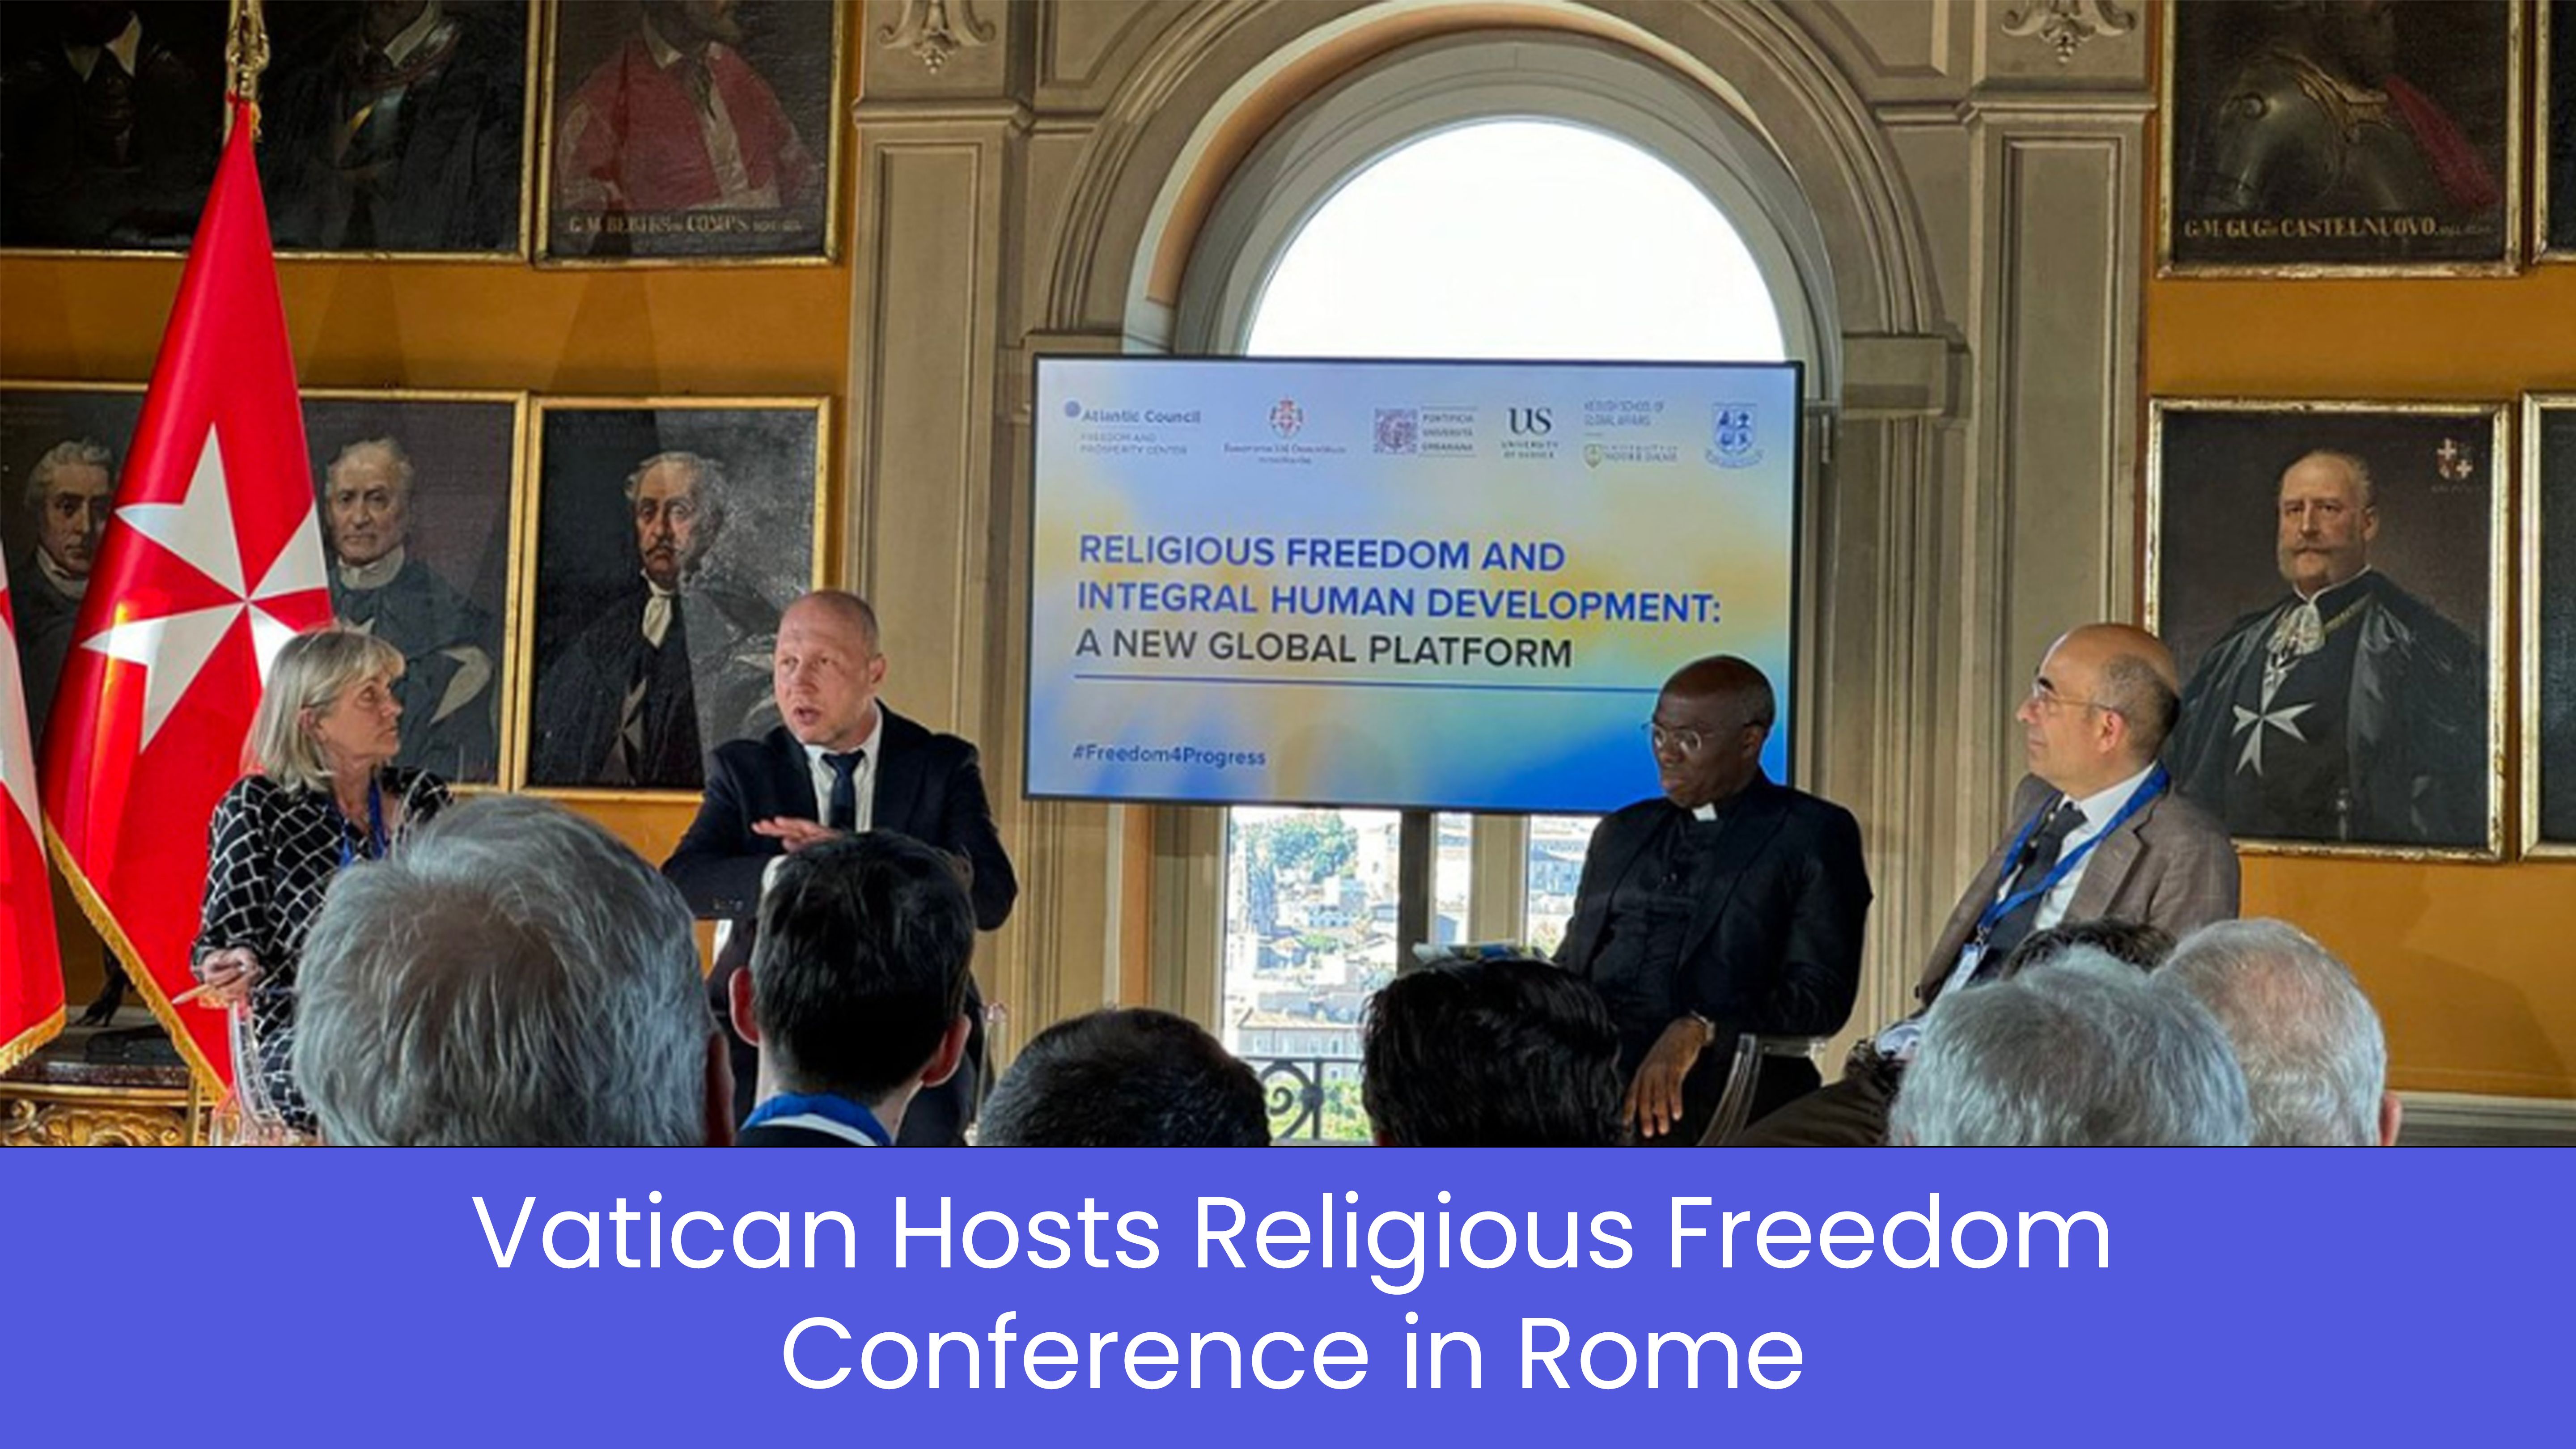 Vatican-Hosts Religious Freedom Conference in Rome